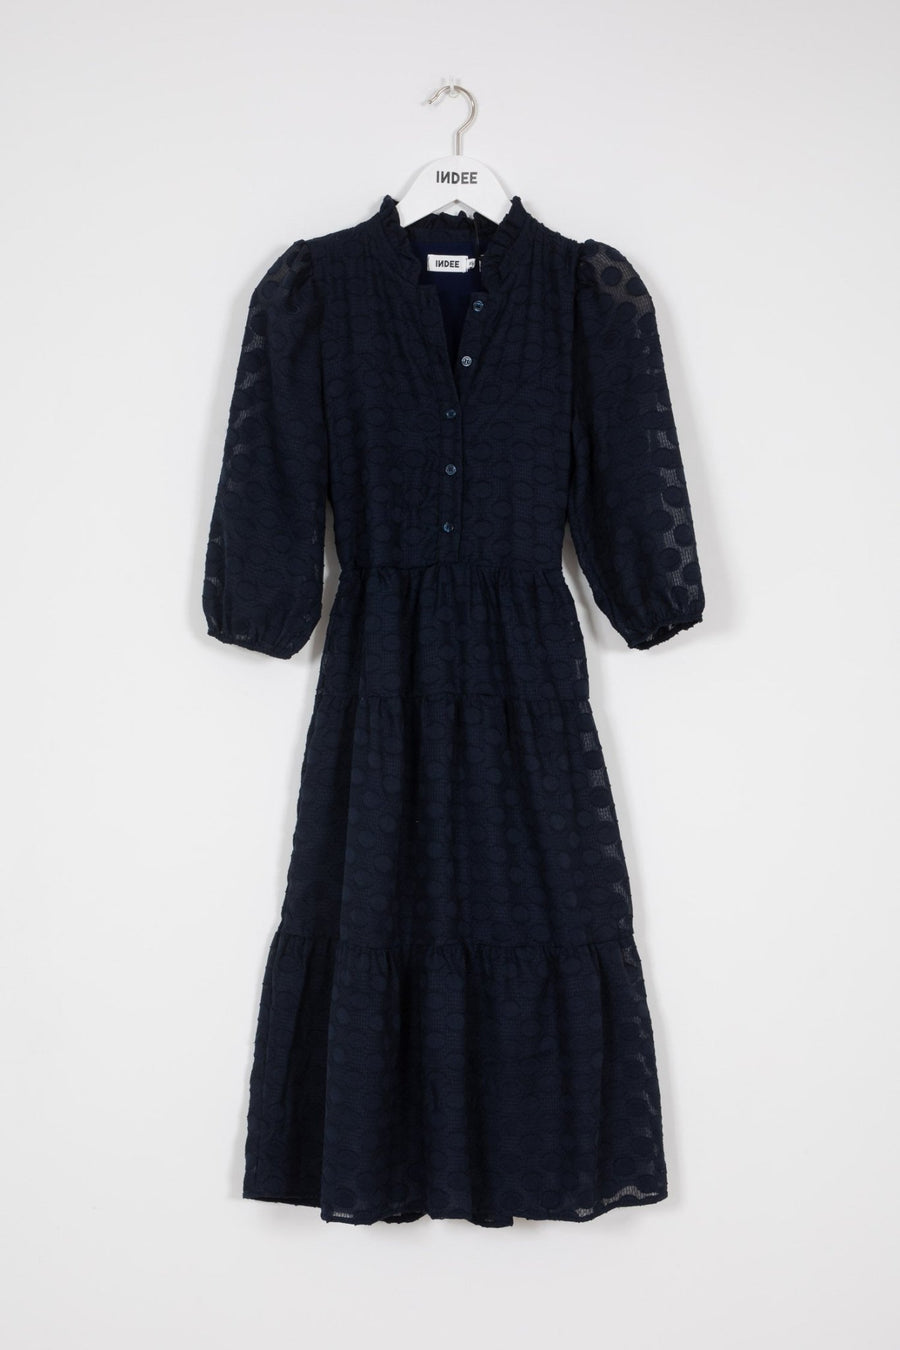 Long Dress with 3/4 Sleeves Collar and Button - Navy Blue - Posh New York